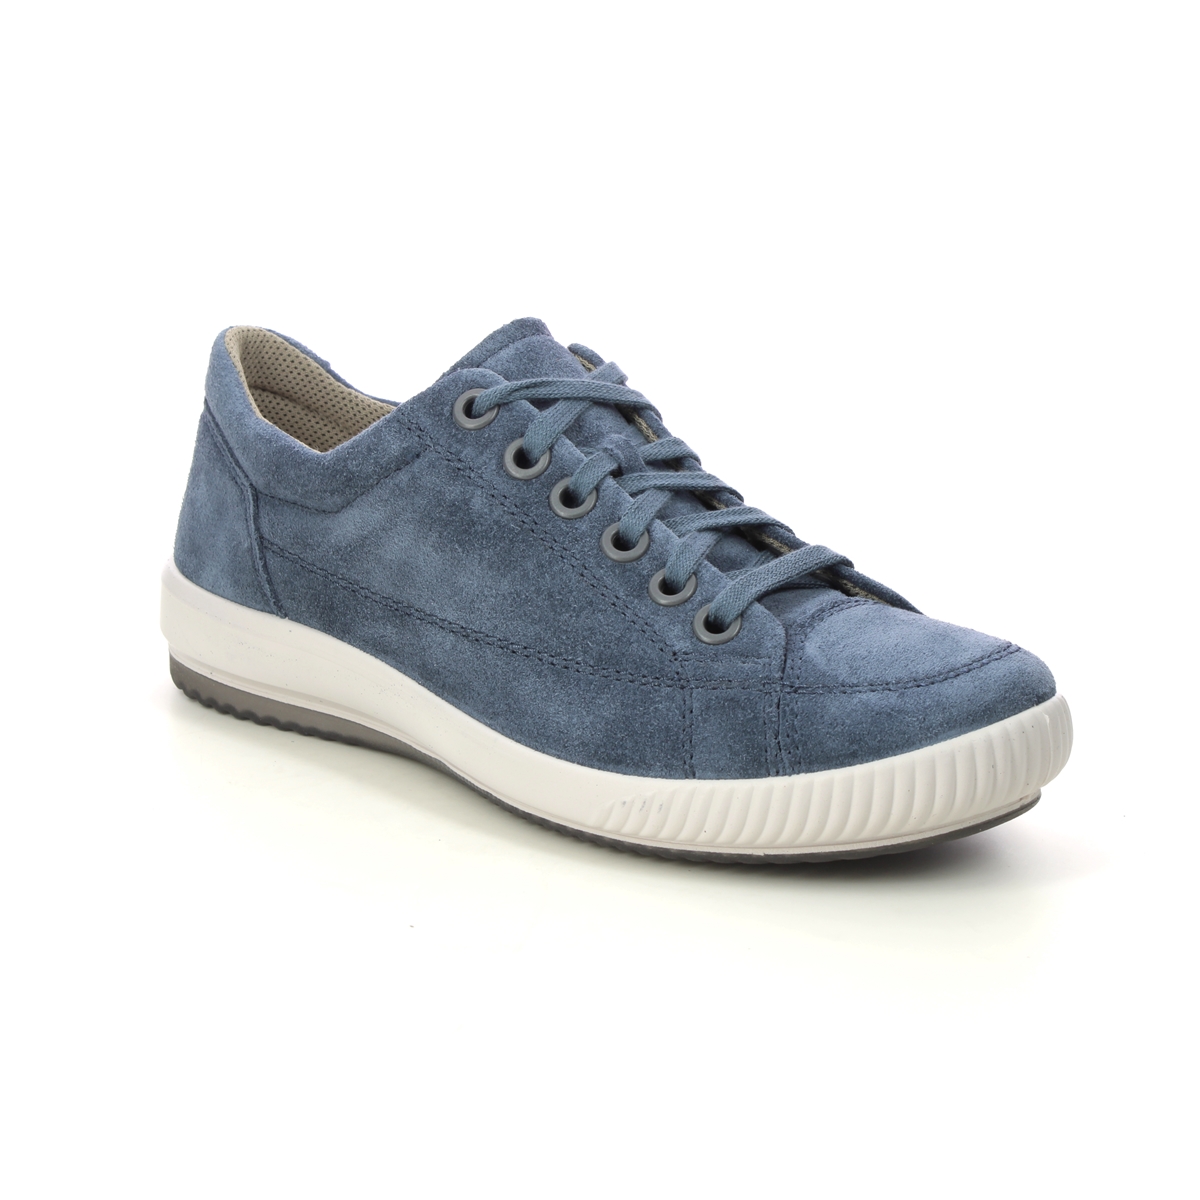 Legero Tanaro 5 Stitch Blue Suede Womens Lacing Shoes 2000161-8600 In Size 9 In Plain Blue Suede